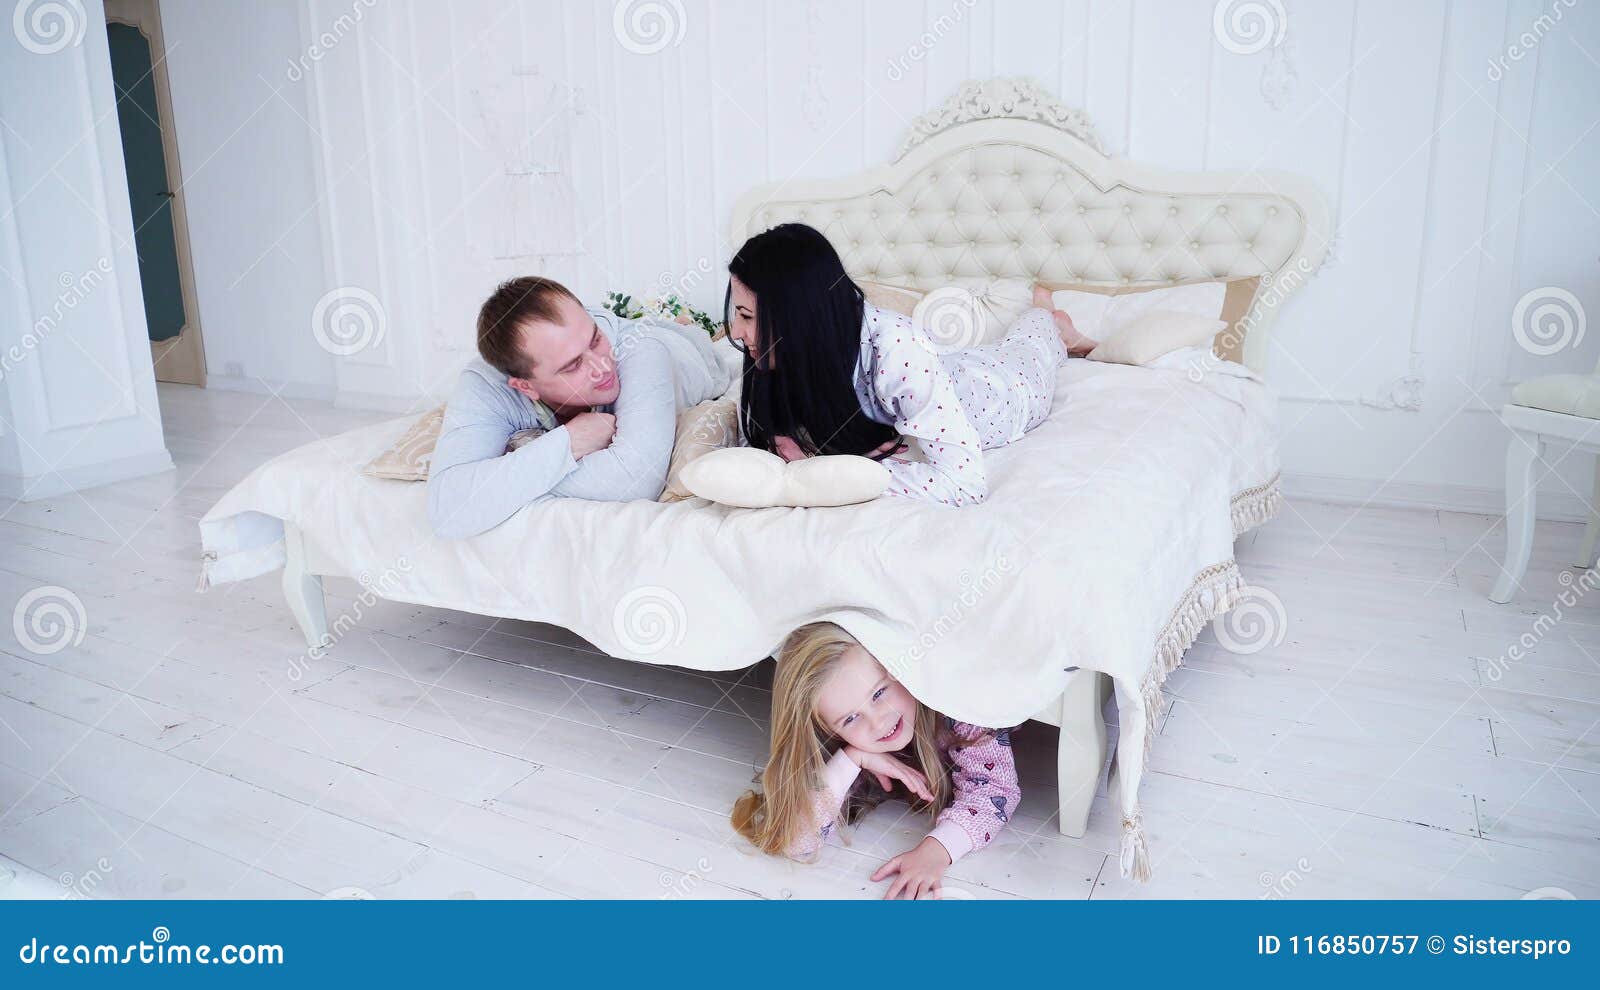 Husband And Wife Lying In Bedroom And Little Daughter Hiding Under Bed Stock Image Image Of Hiding Playful 116850757